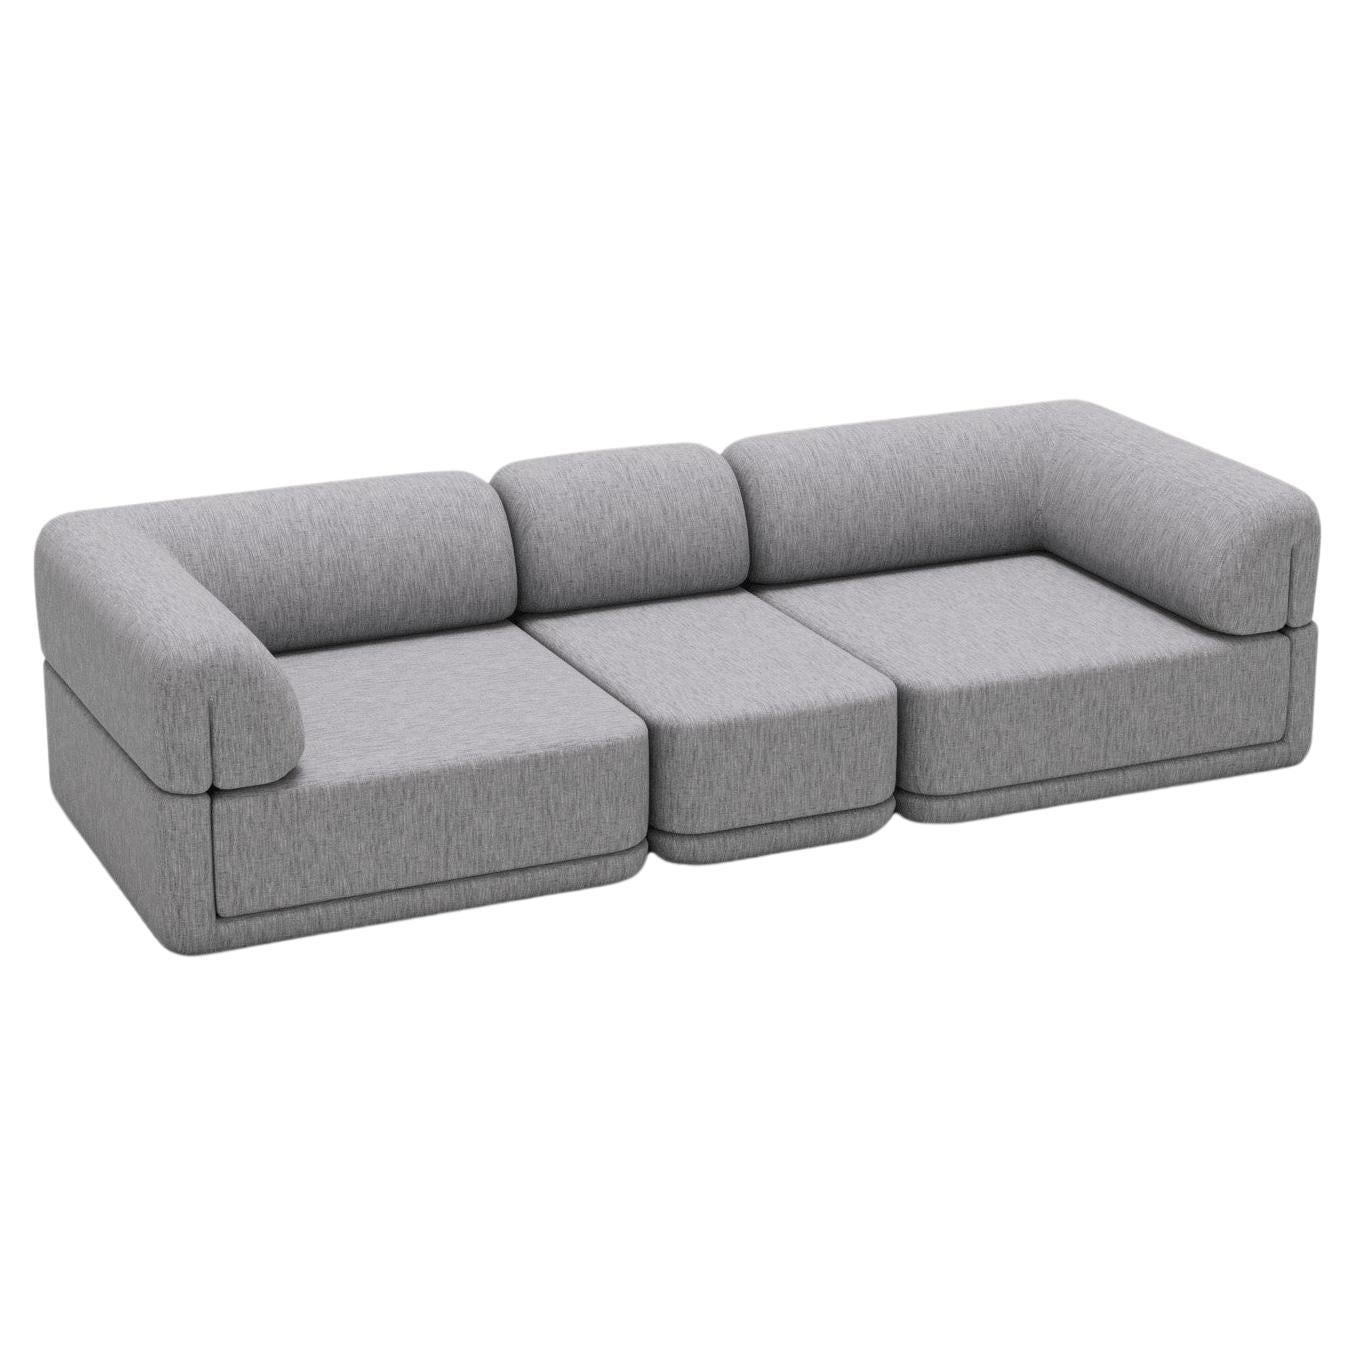 Sofa Slim Set - Inspired by 70s Italian Luxury Furniture

Discover The Cube Sofa, where art meets adaptability. Its sculptural design and customizable comfort create endless possibilities for your living space. Make a statement, elevate your